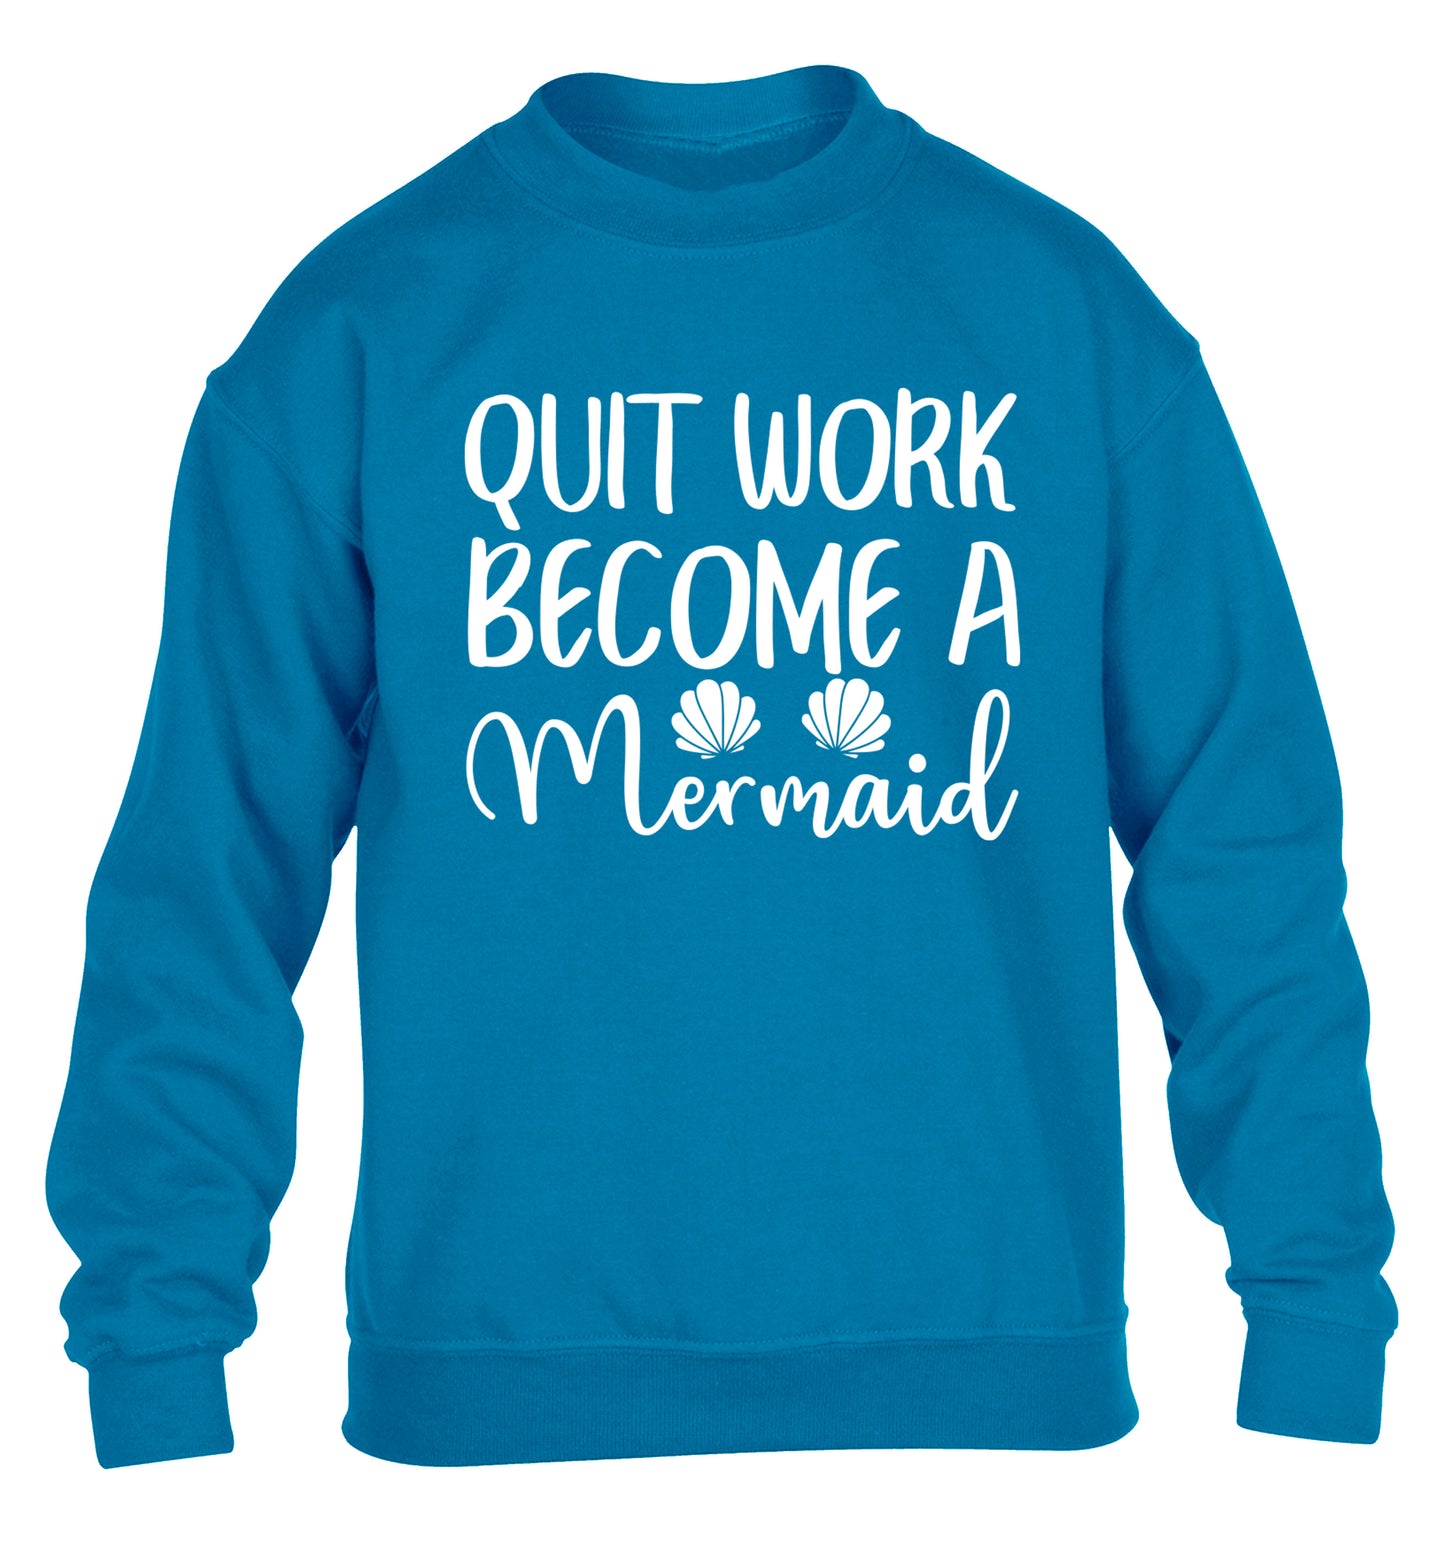 Quit work become a mermaid children's blue sweater 12-13 Years